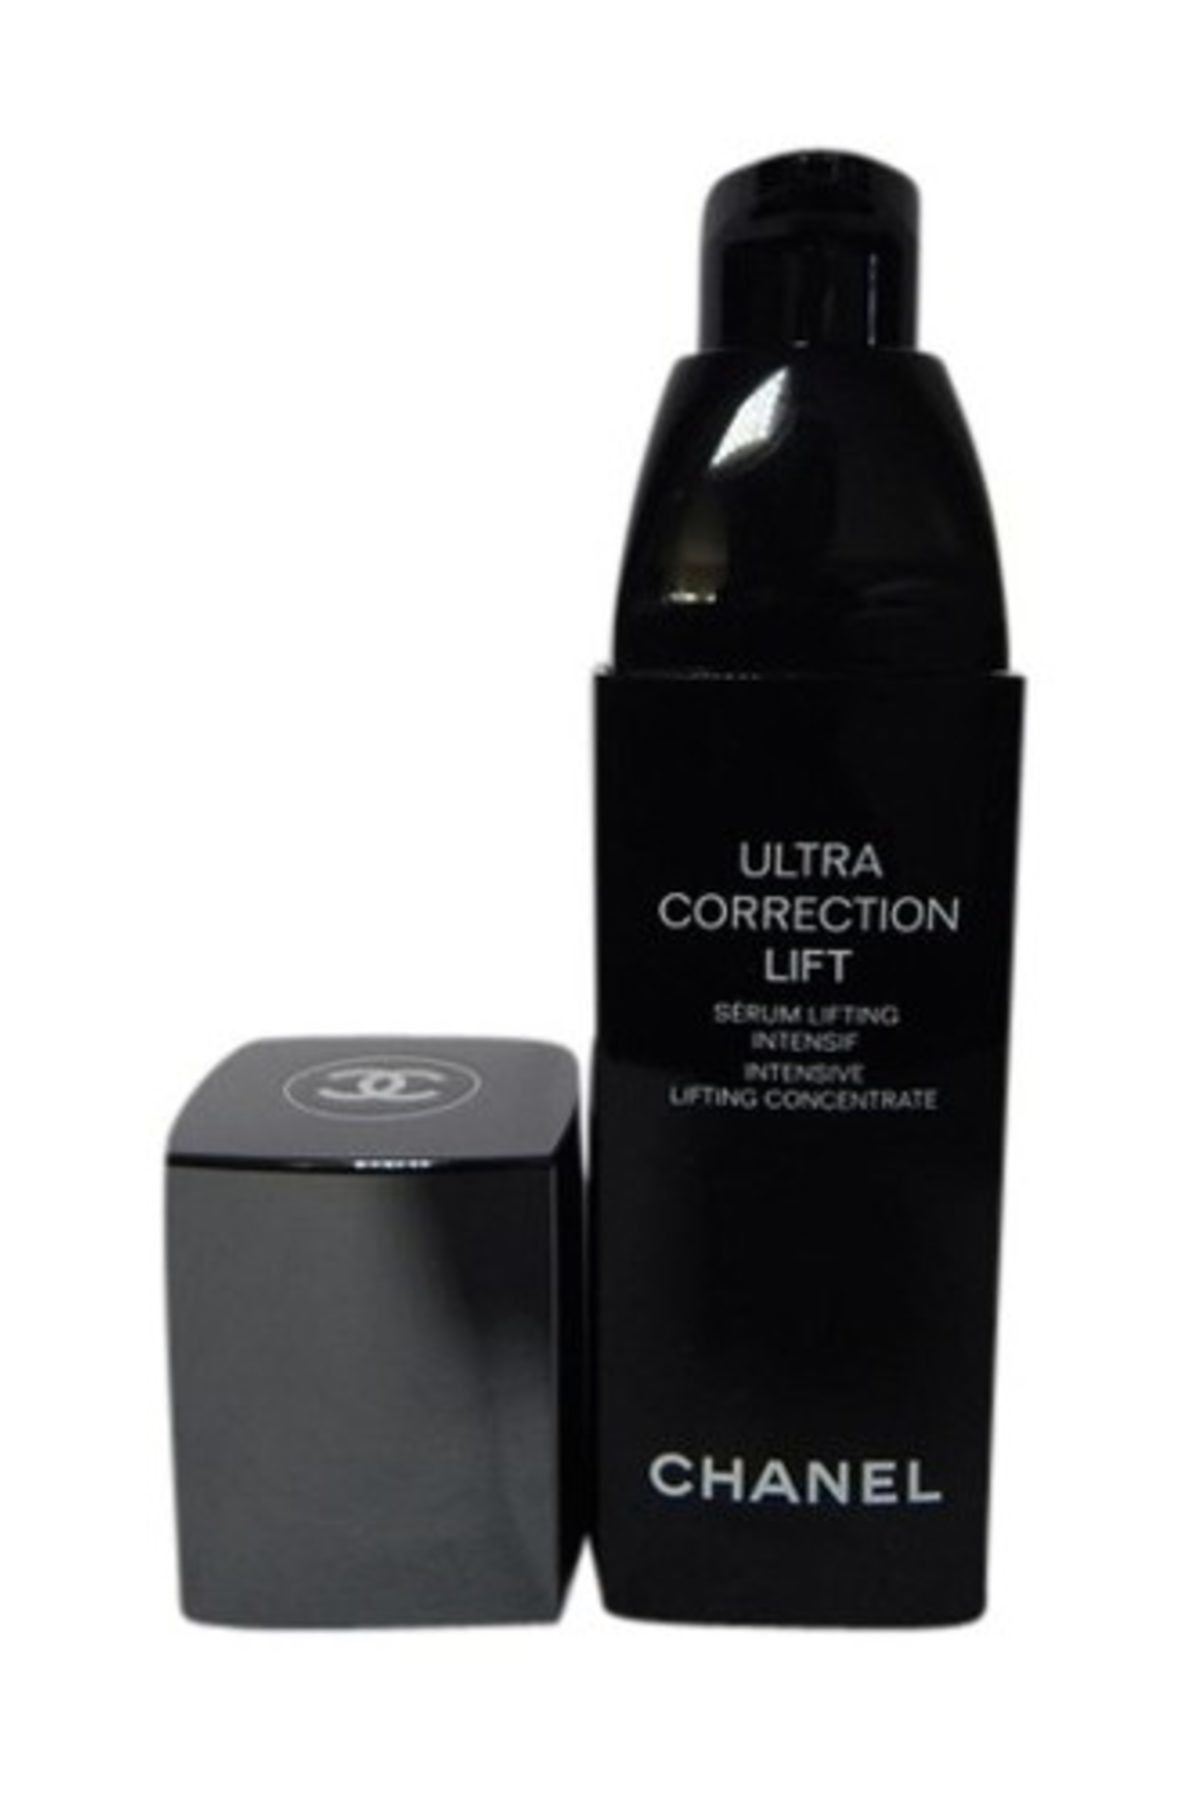 Chanel Anti-age Serum - Ultra Correction Lift Serum Lifting Concentrate 30 ml 043204